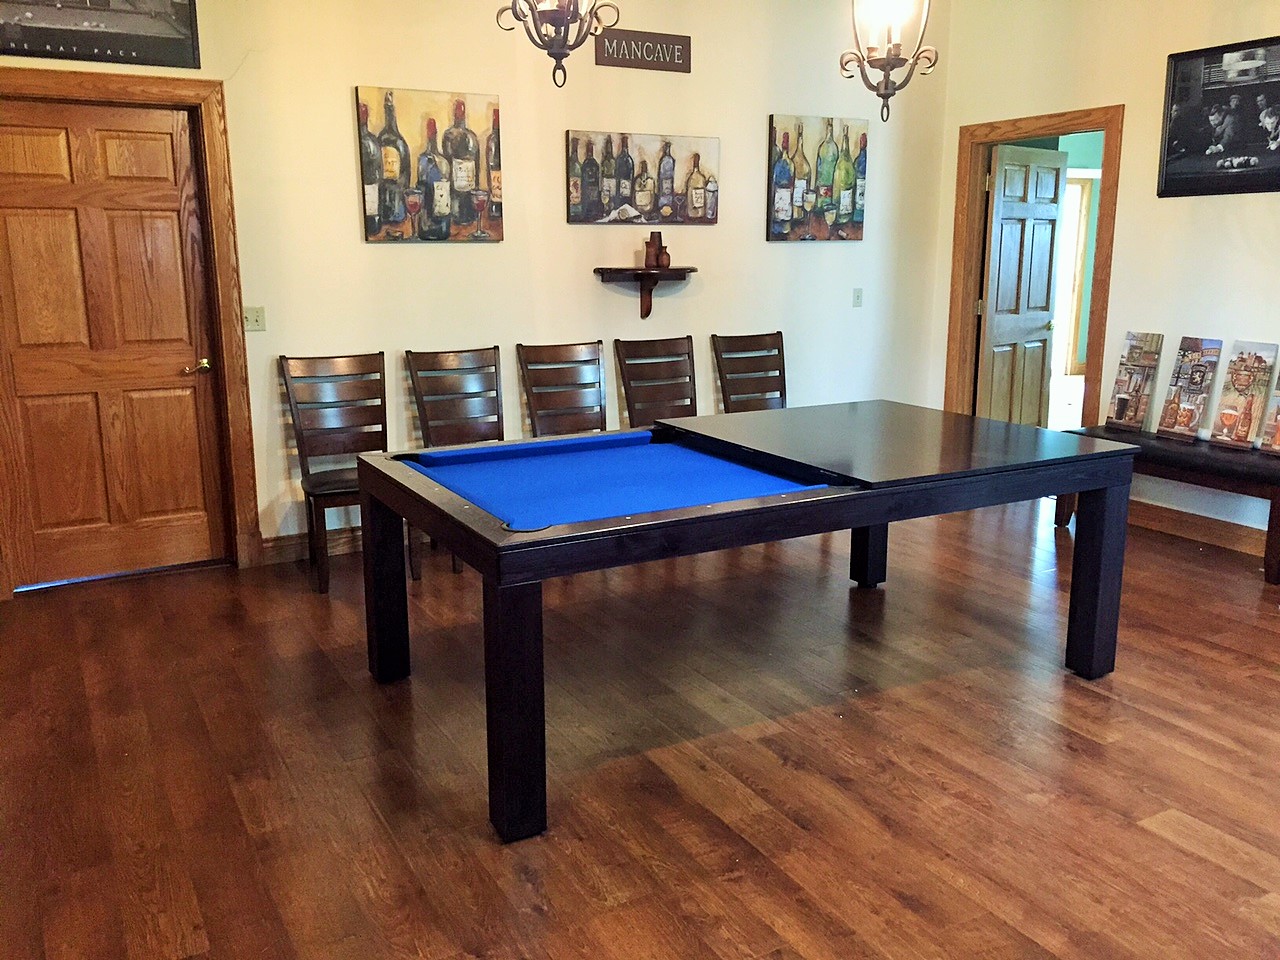 Man Cave Pool Tables